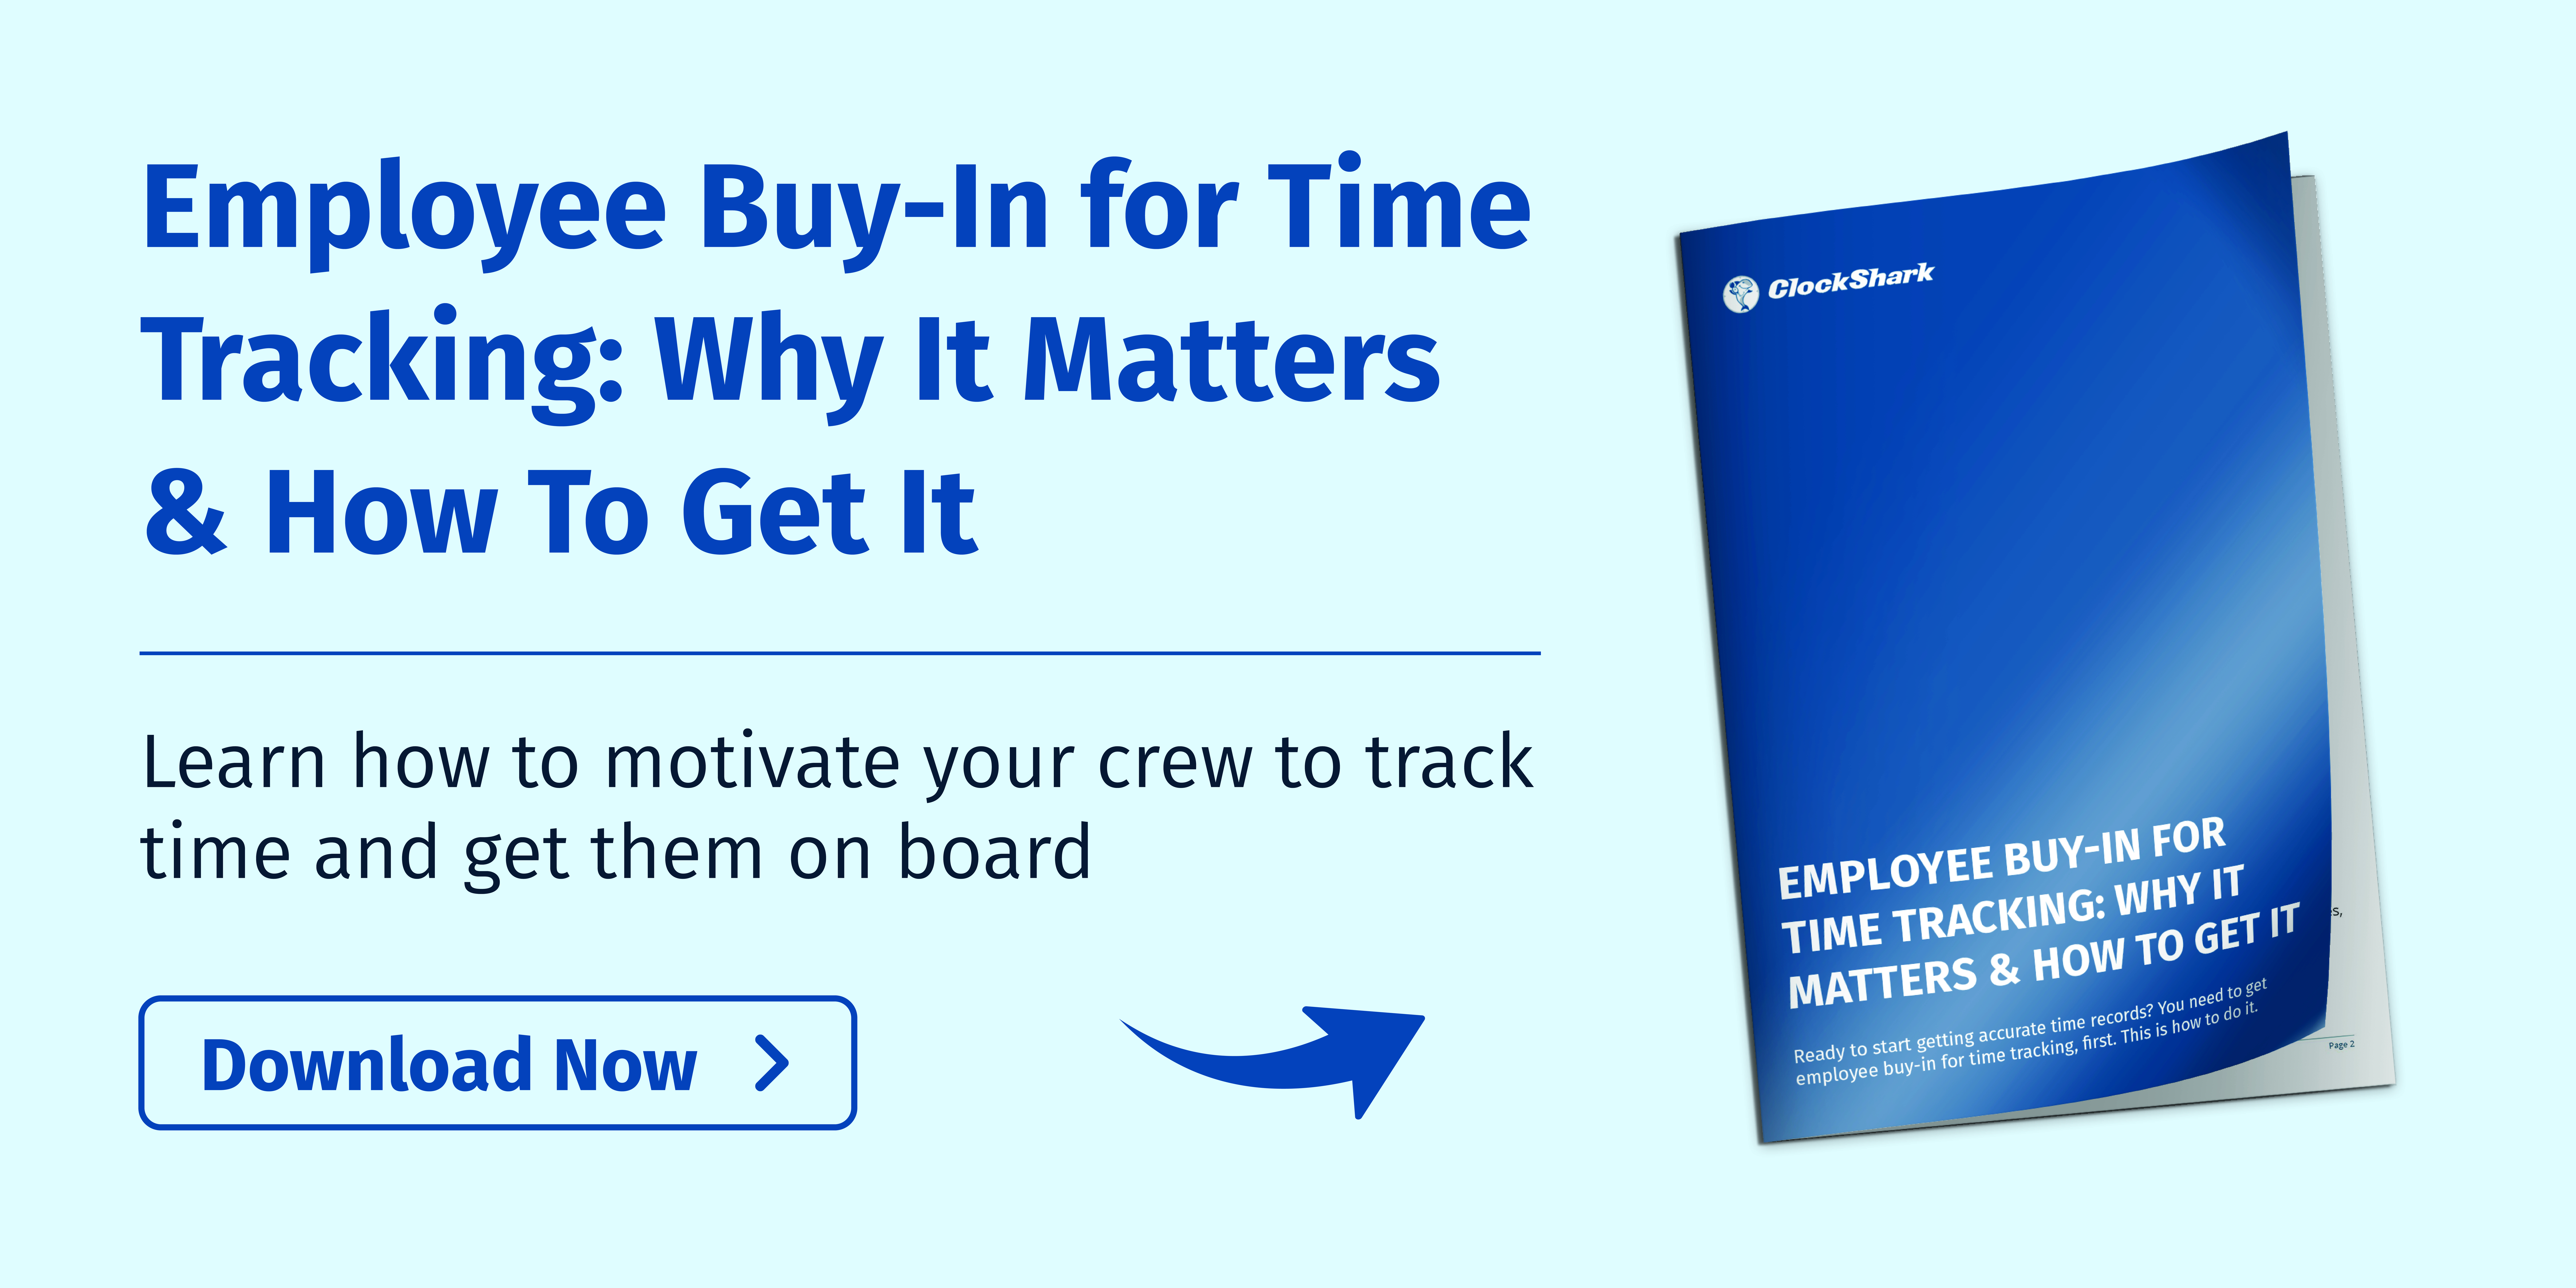 Employee Buy-In for Time Tracking